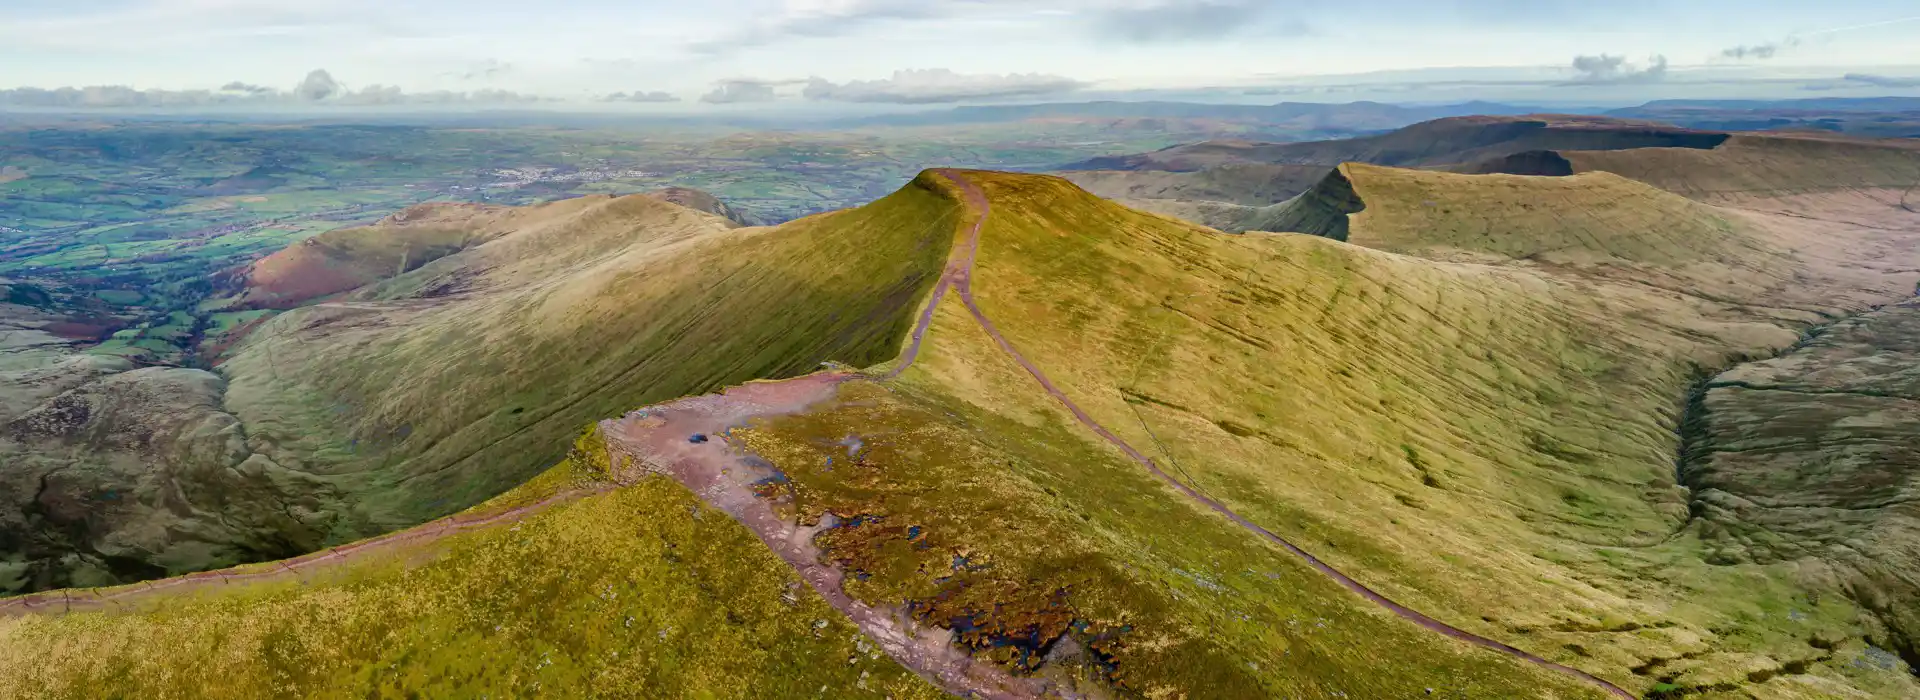 All year round campsites in the Brecon Beacons